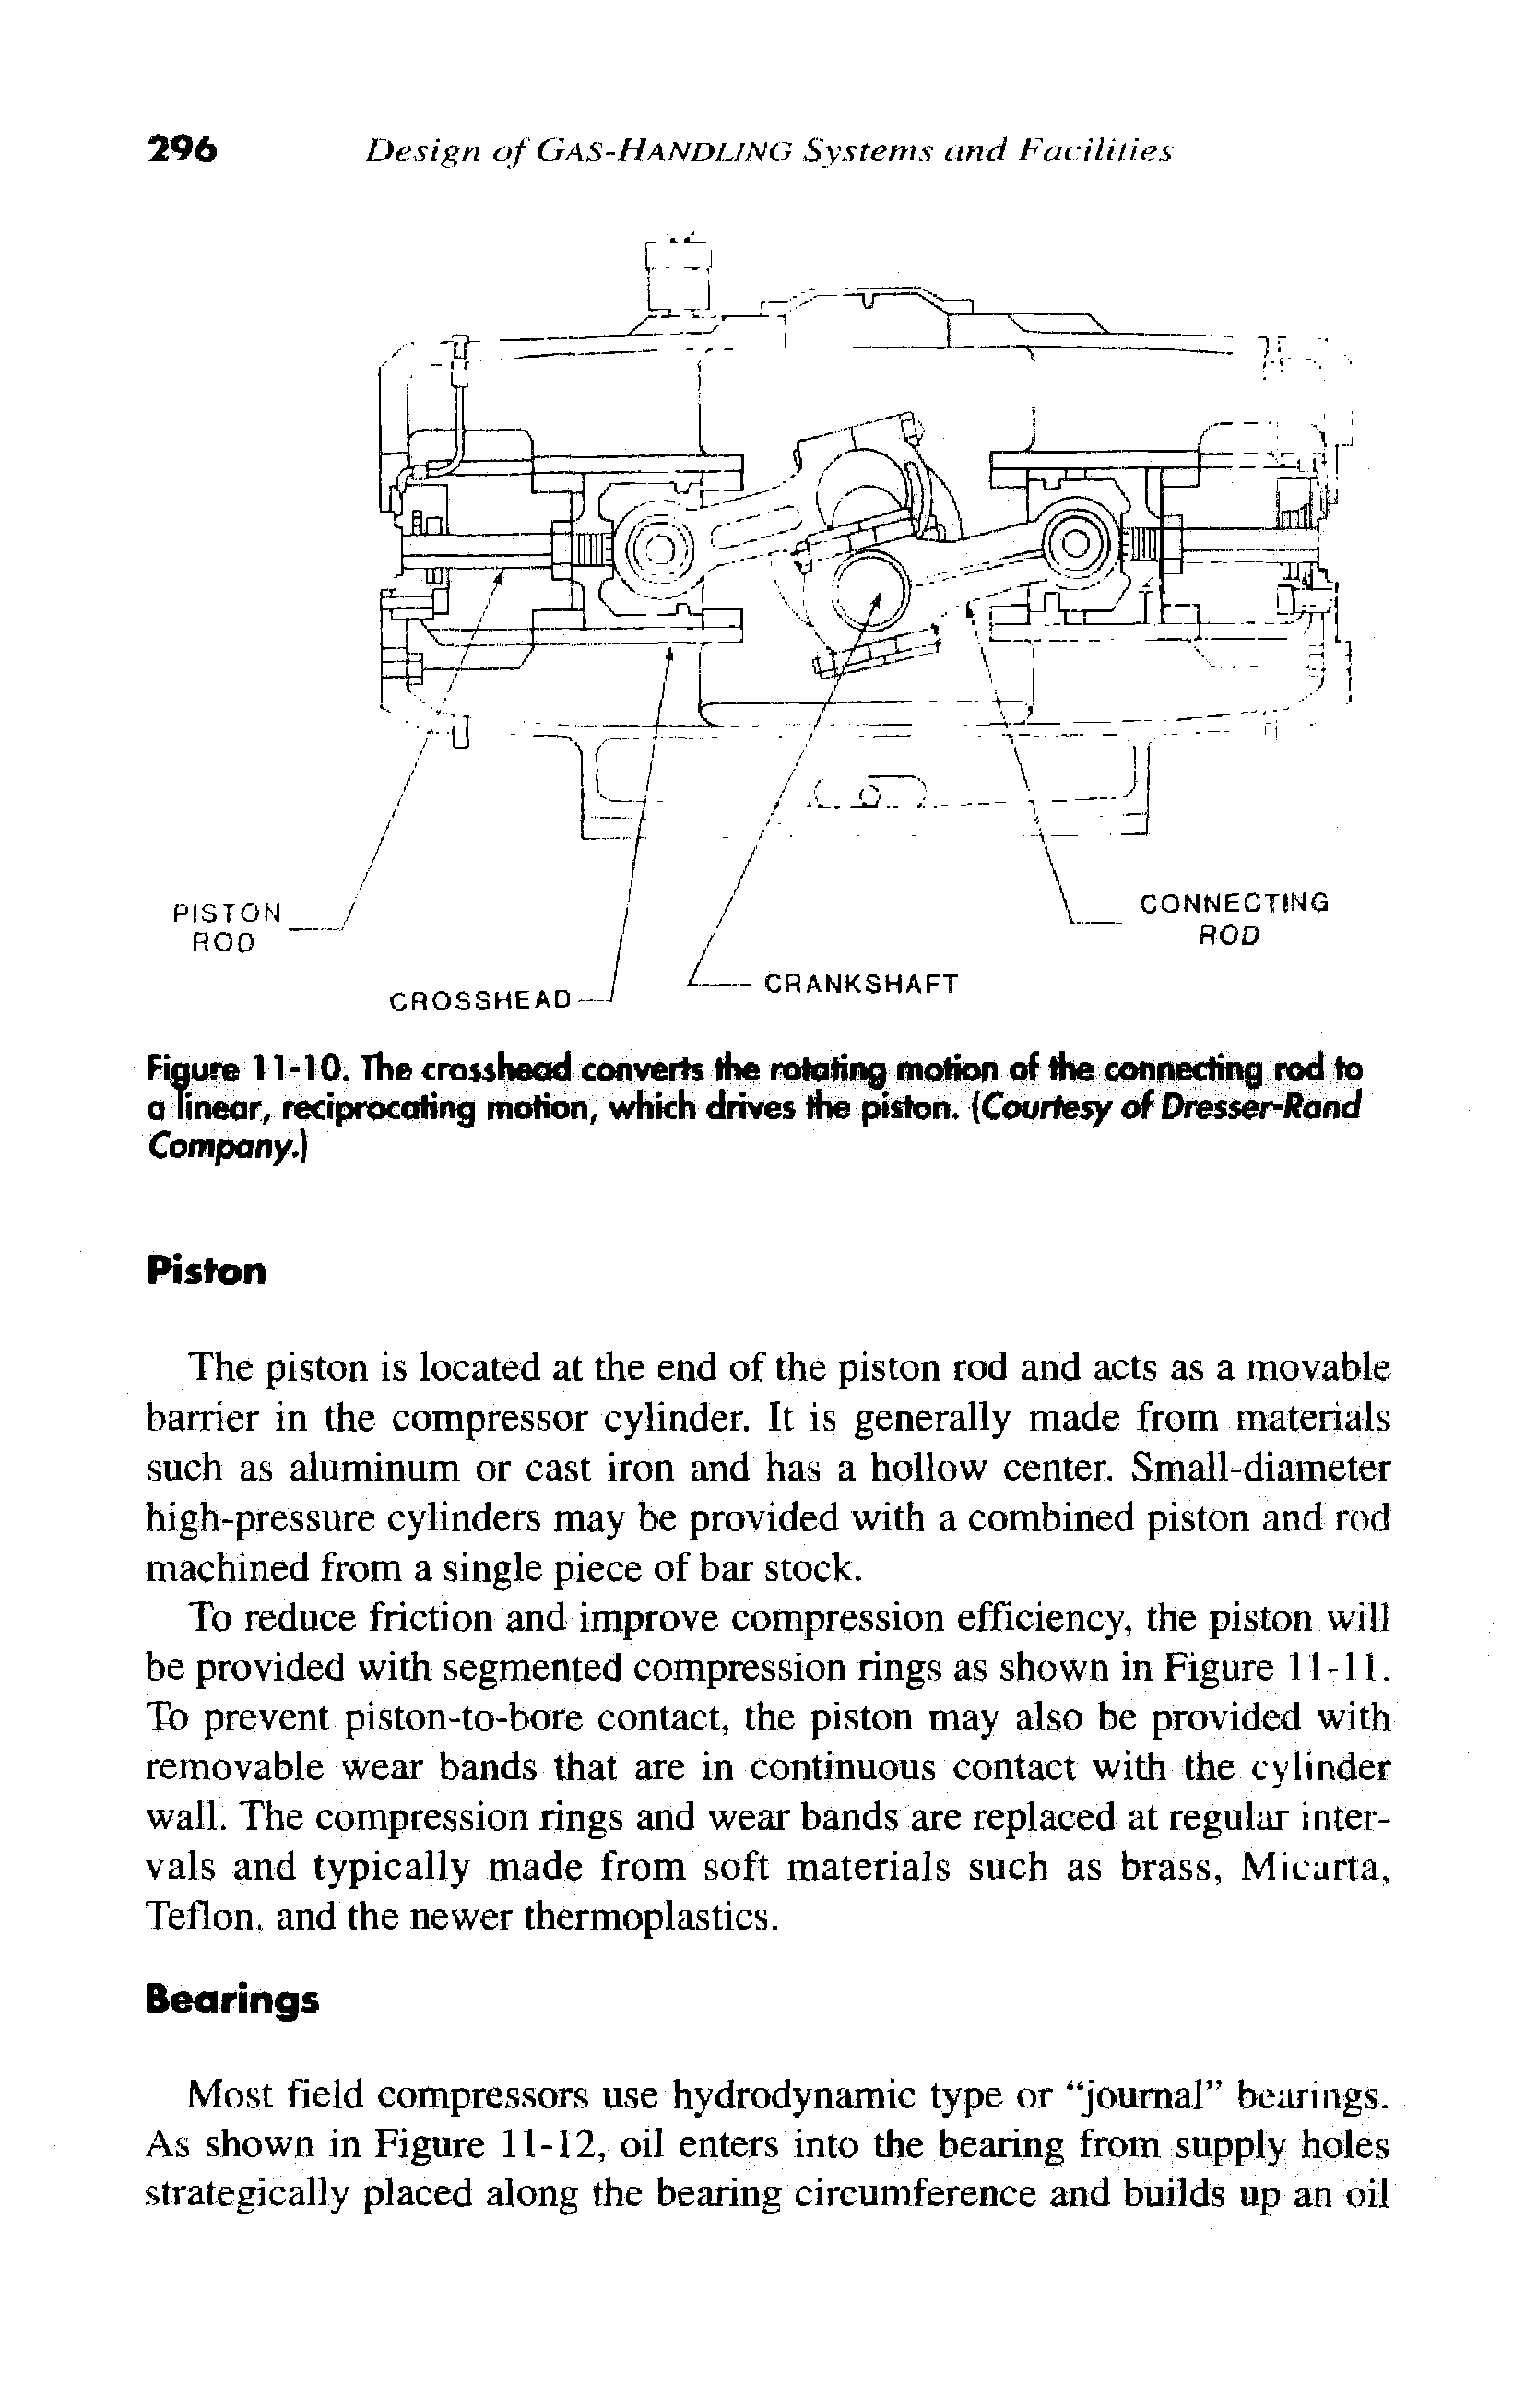 Figure 11-10. The croMheod converls the rotating motion of the connecting rod to 0 linear, reciprocating motion, which drives the piston. [Courtesy of Dresser-Rand Company.)...